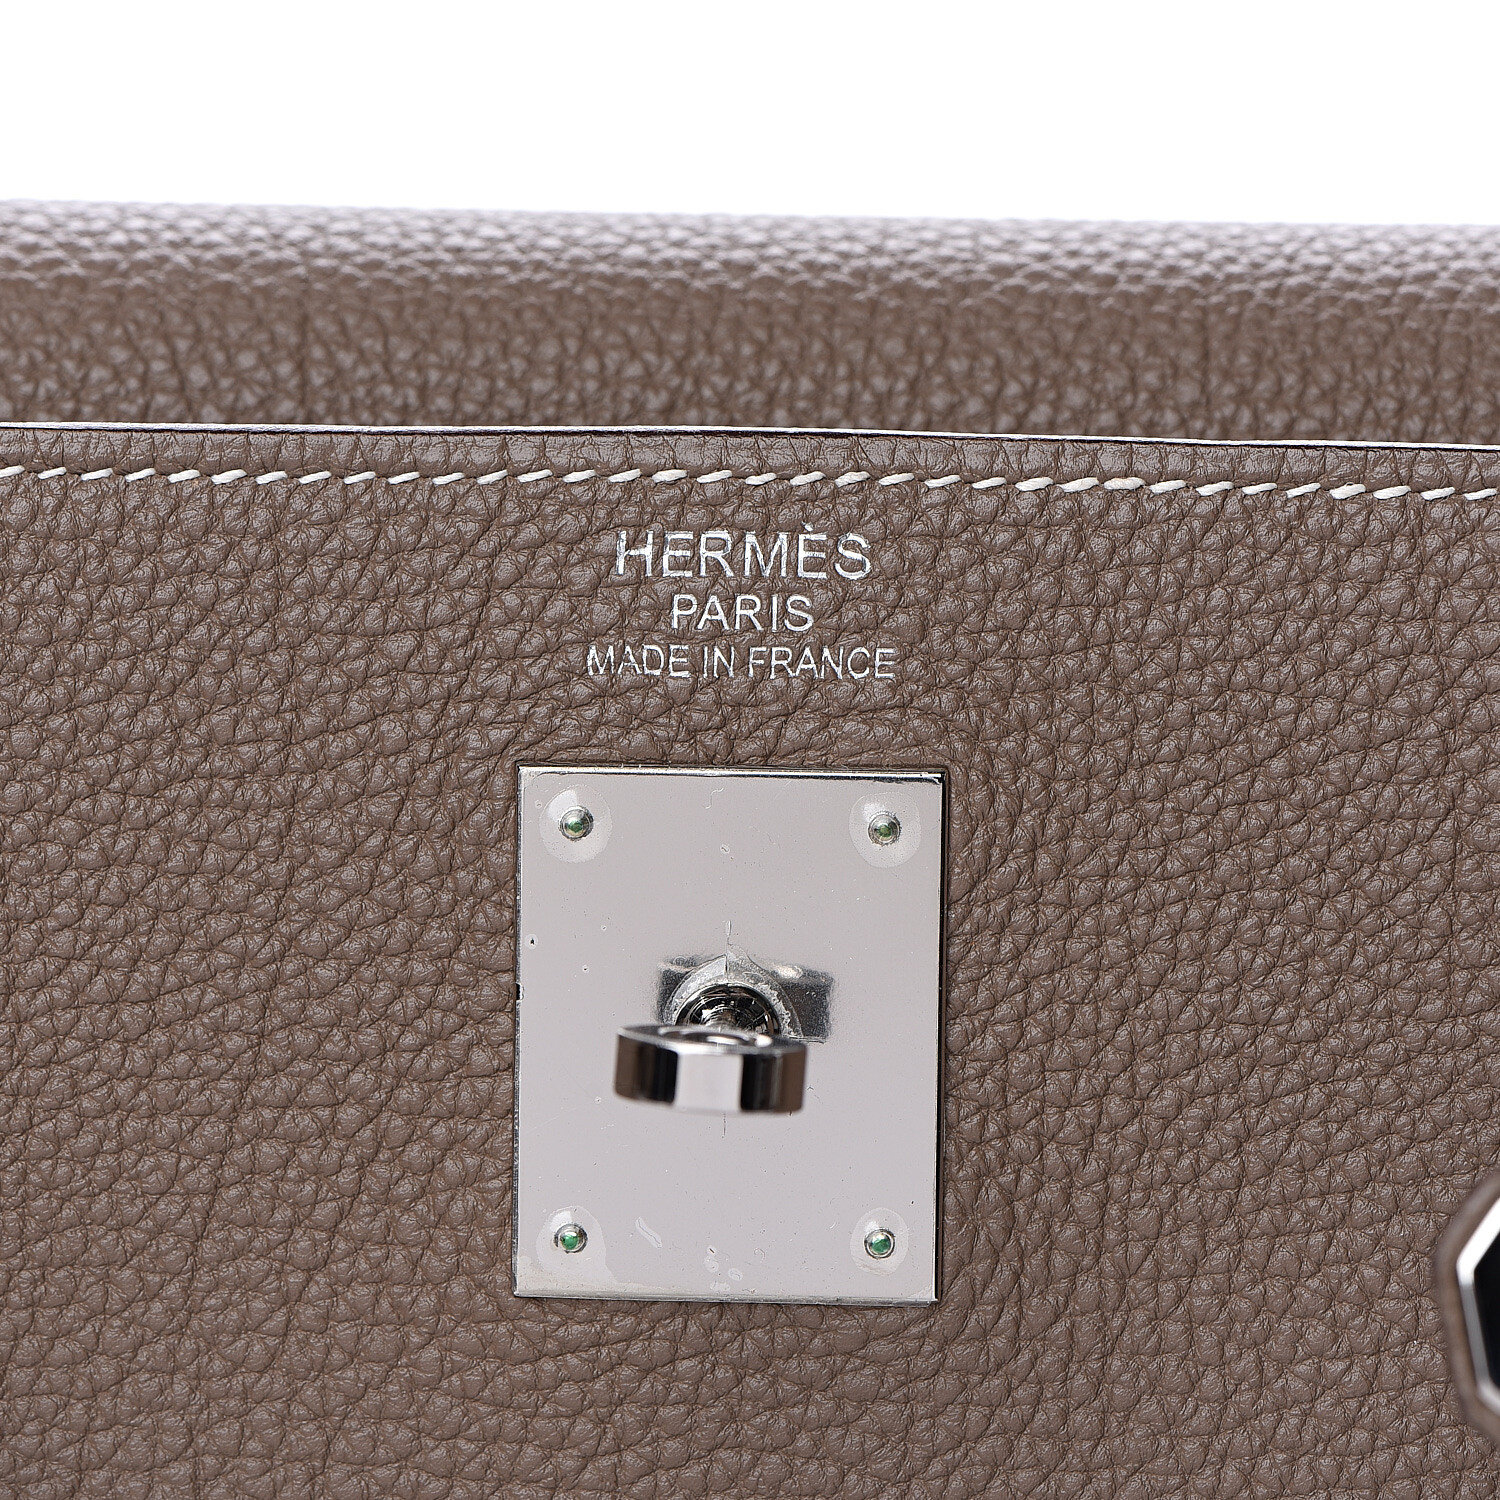 hermes-togo-kelly-retourne-35-etoupe-Available-For-Sale-Collecting-Luxury-6.jpg